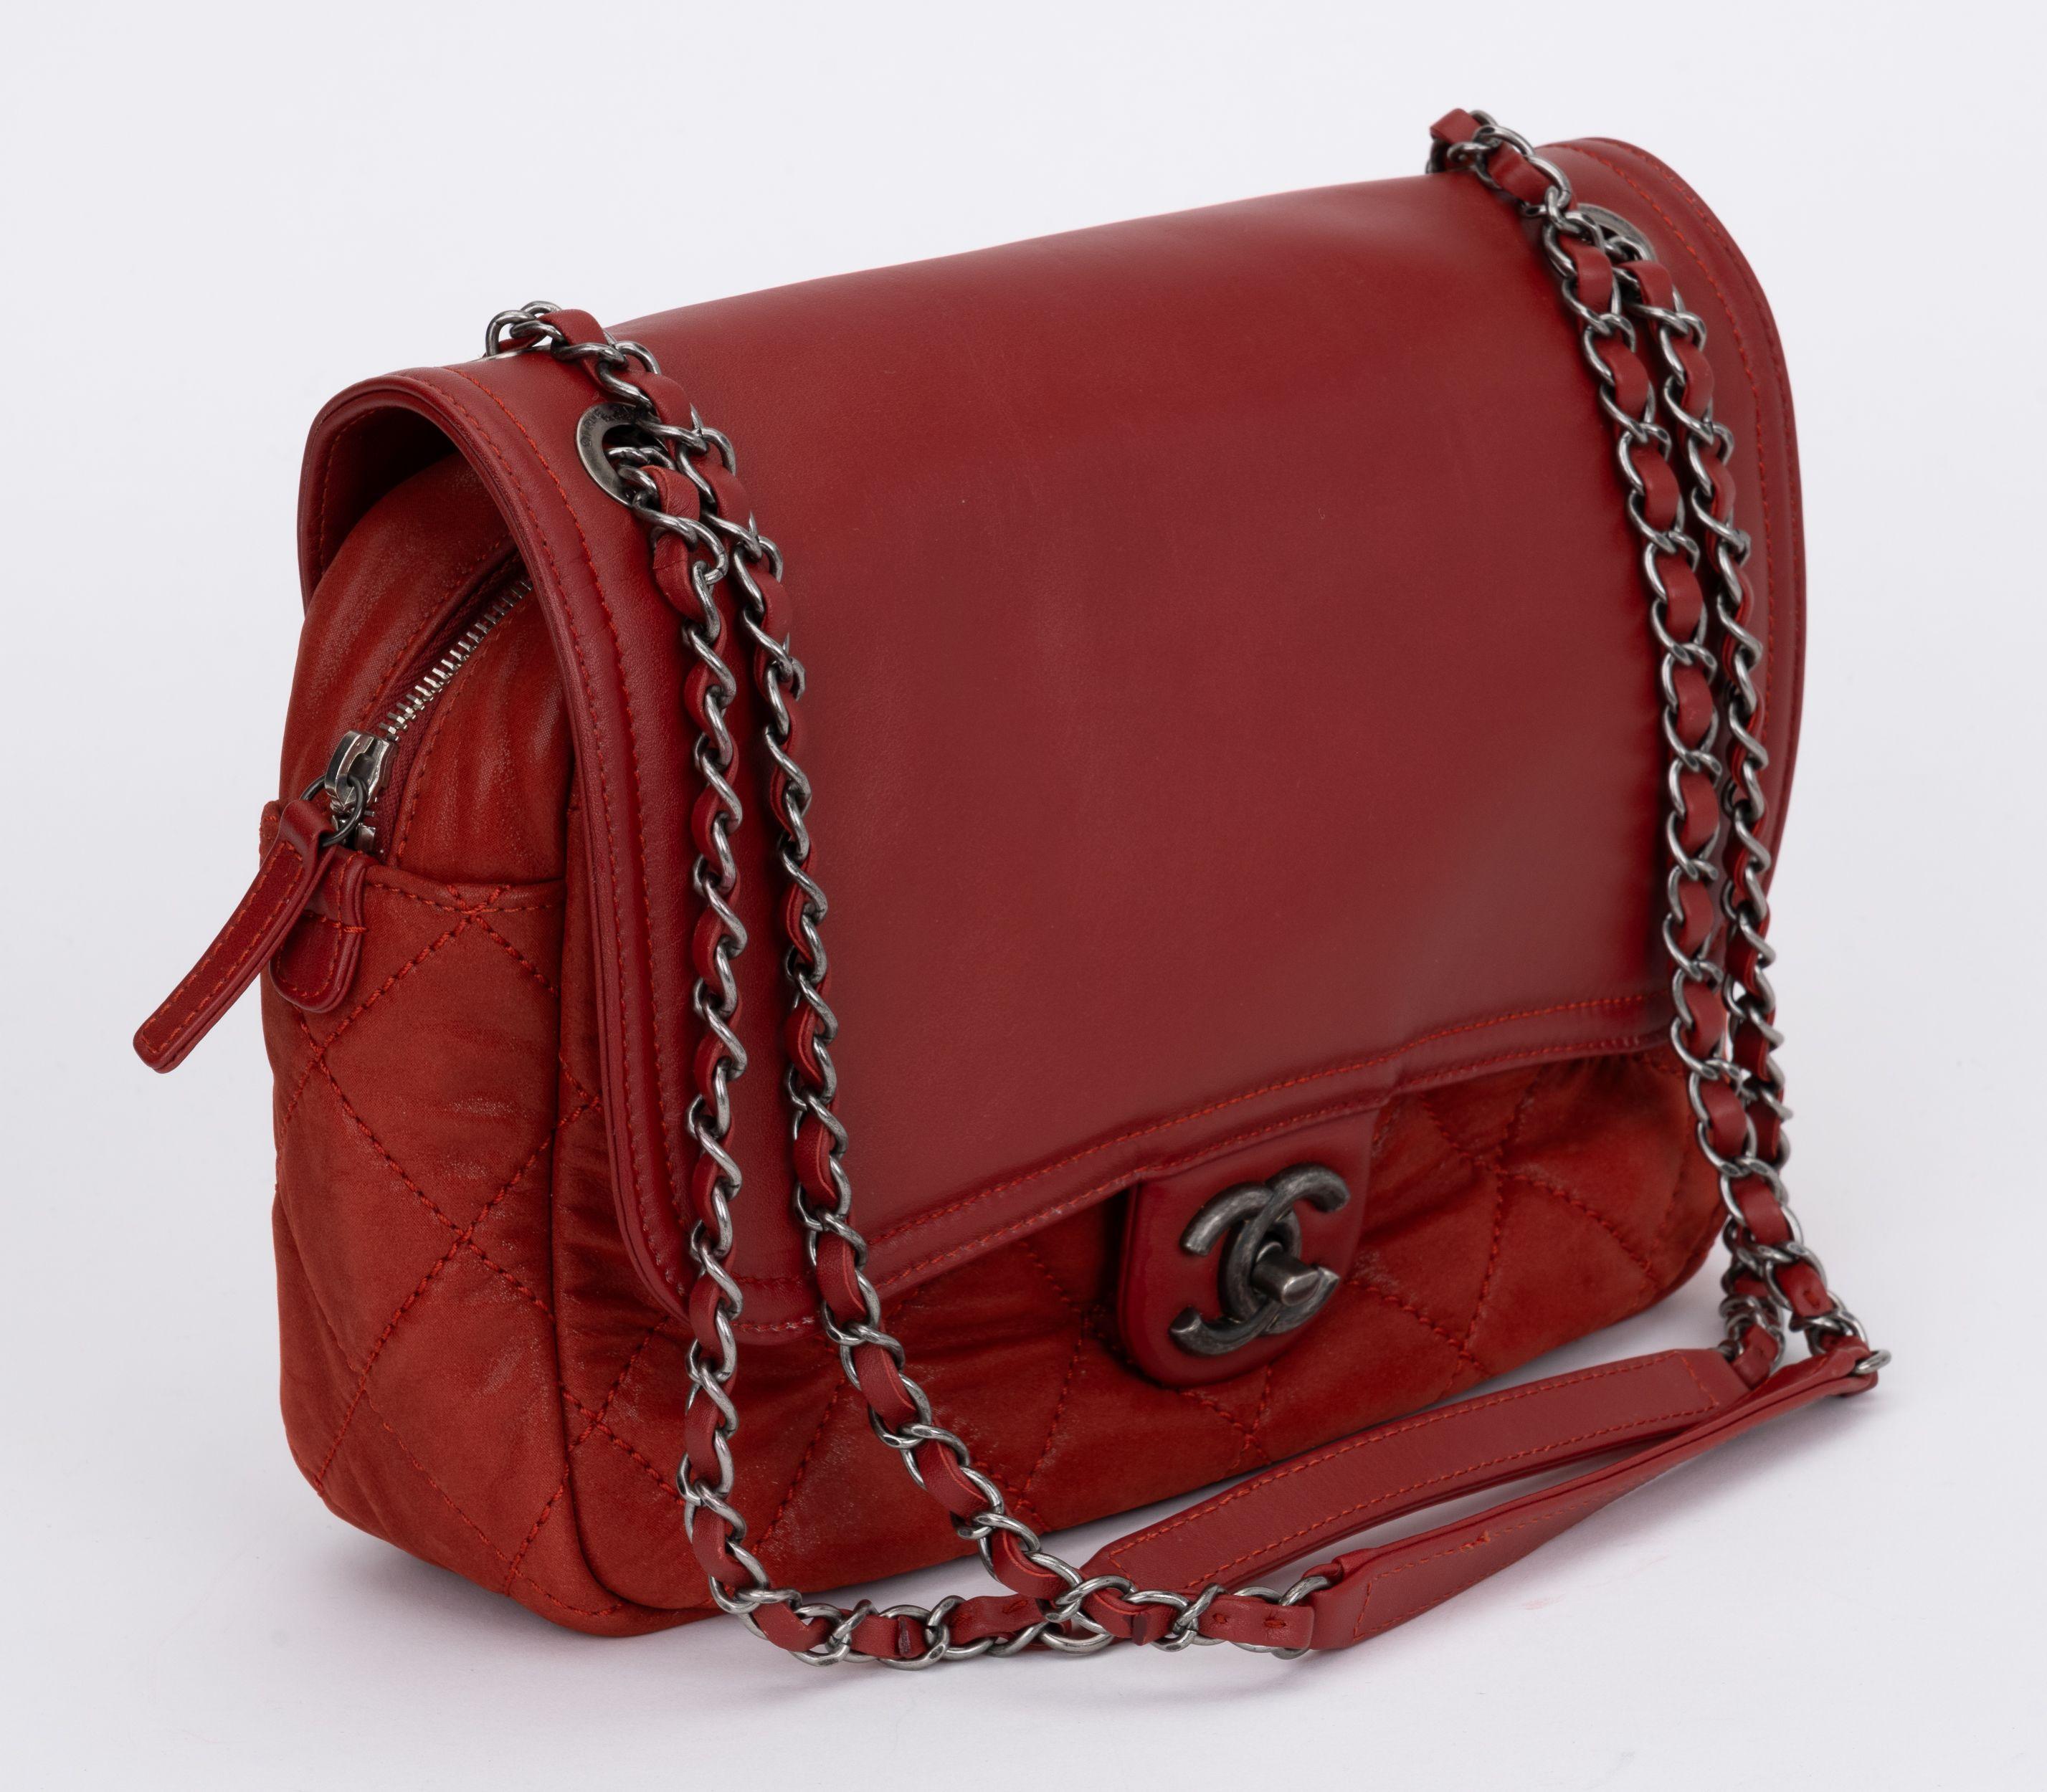 Chanel red brushed leather 2 way shoulder bag. Lower zipped compartment and classic top flap. Shoulder drop 12